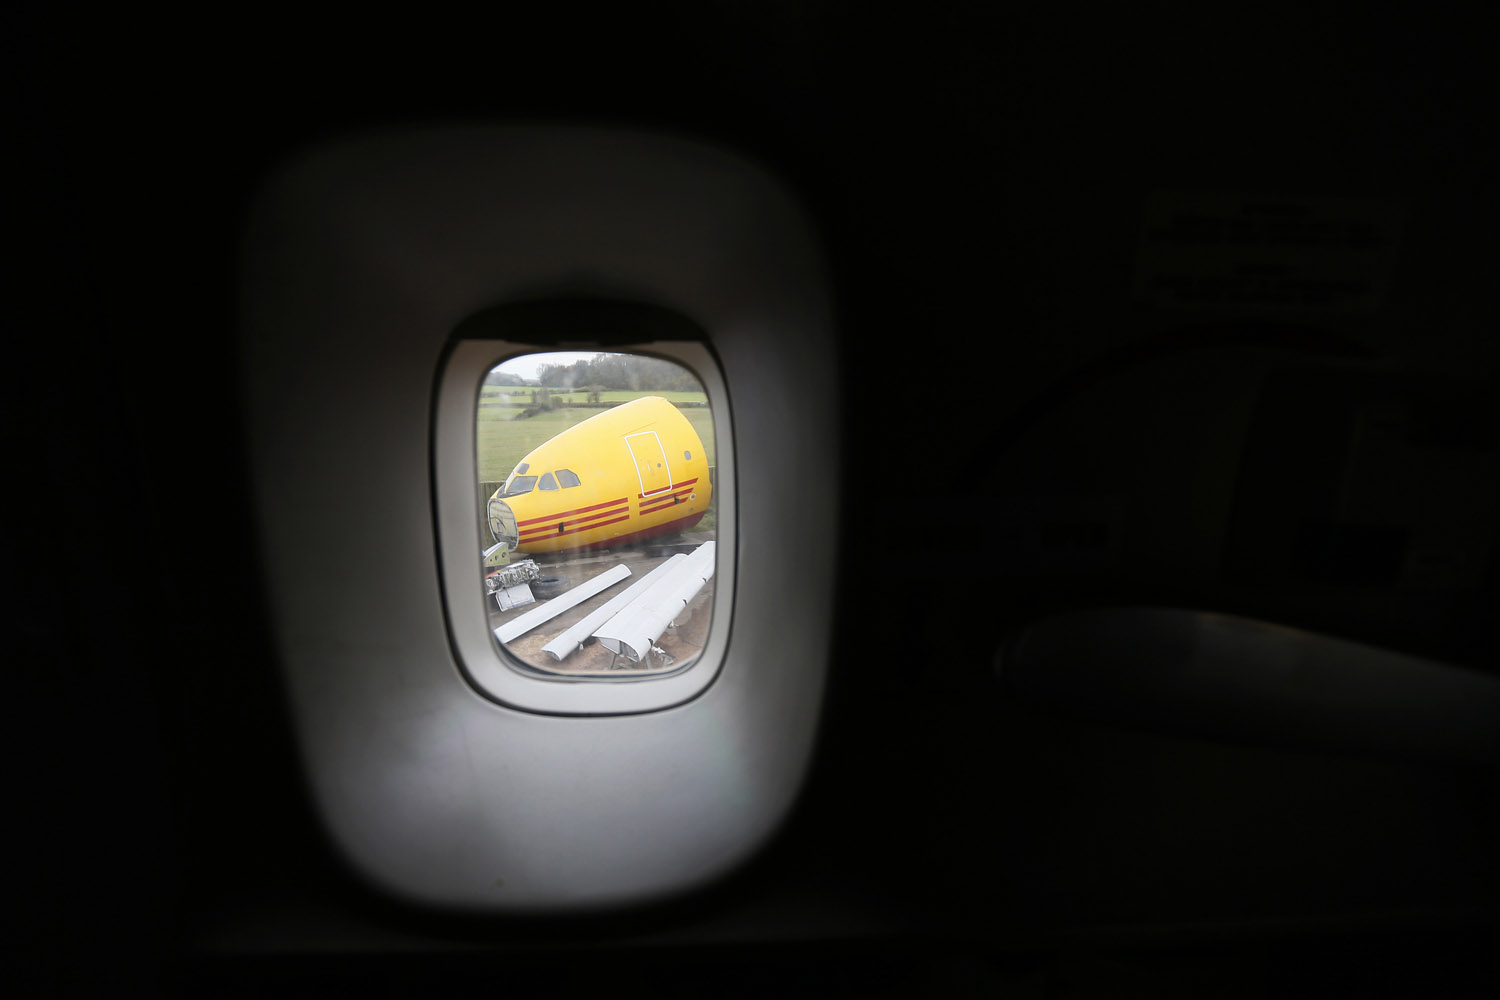 Nov. 27, 2013. A dismantled Airbus A300 is seen through a window of a Boeing 747 in the recycling yard of Air Salvage International (ASI) in Kemble, central England.